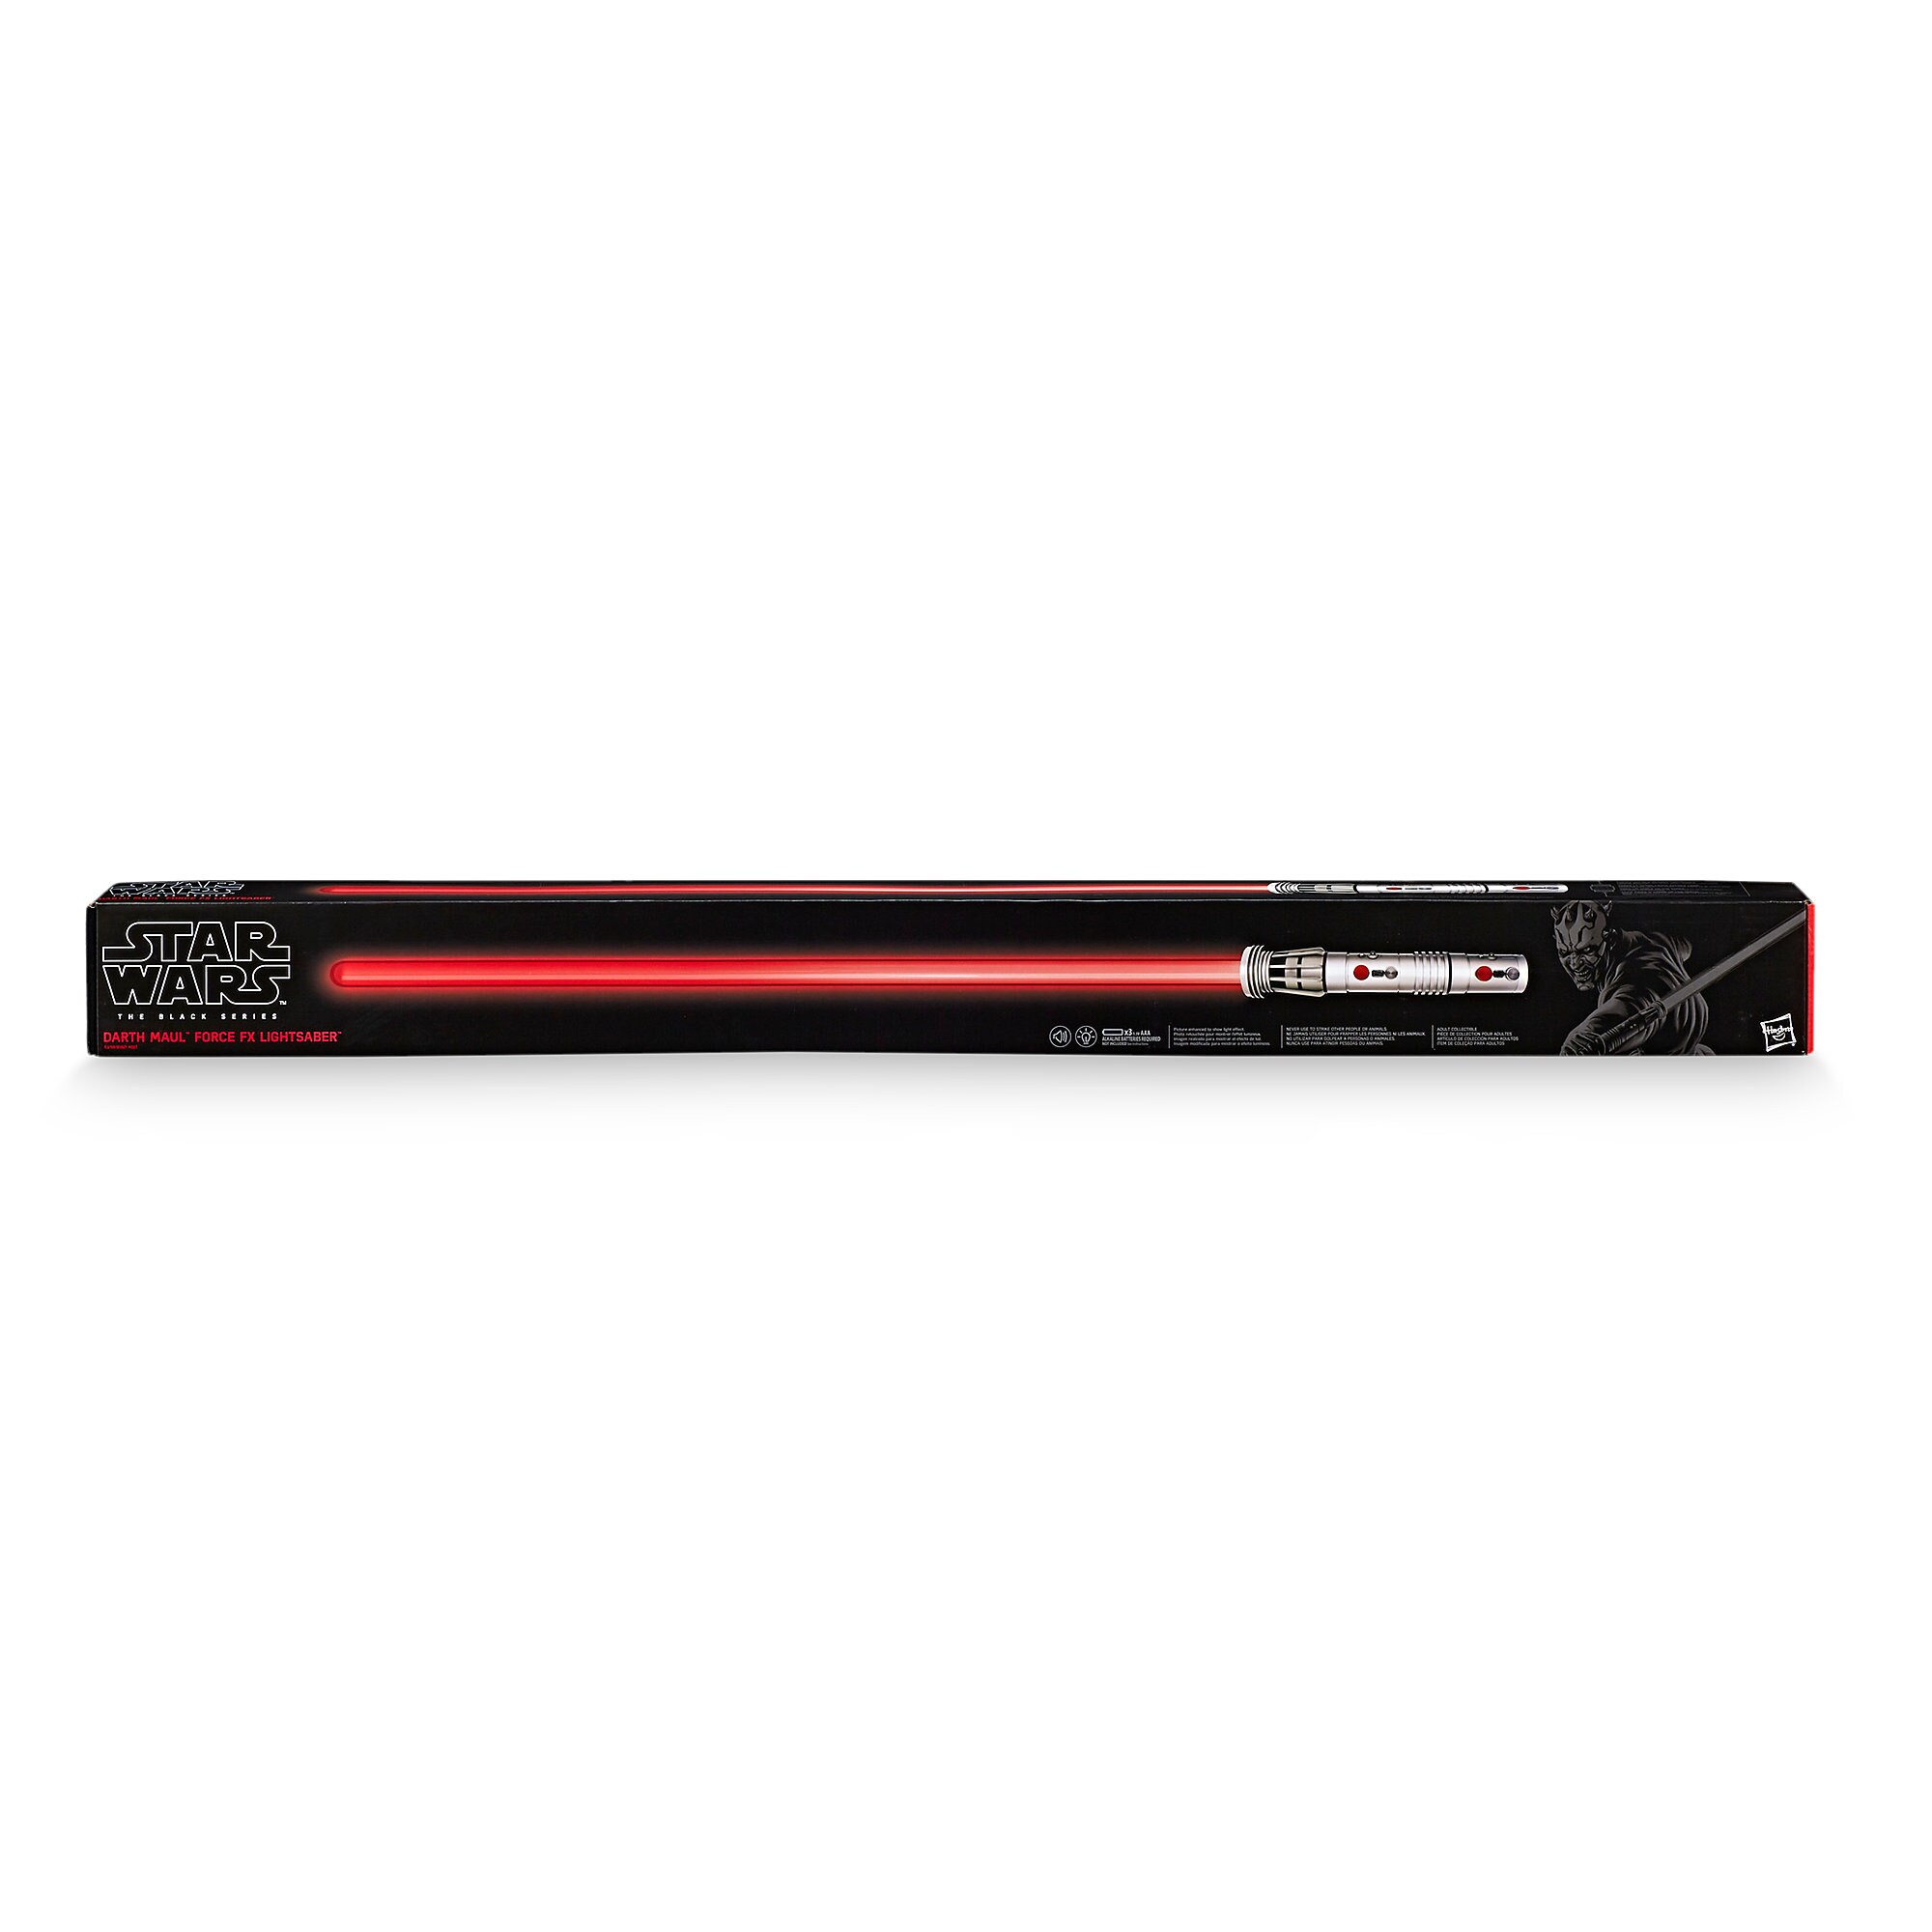 Darth Maul The Black Series Force FX Lightsaber by Hasbro - Star Wars